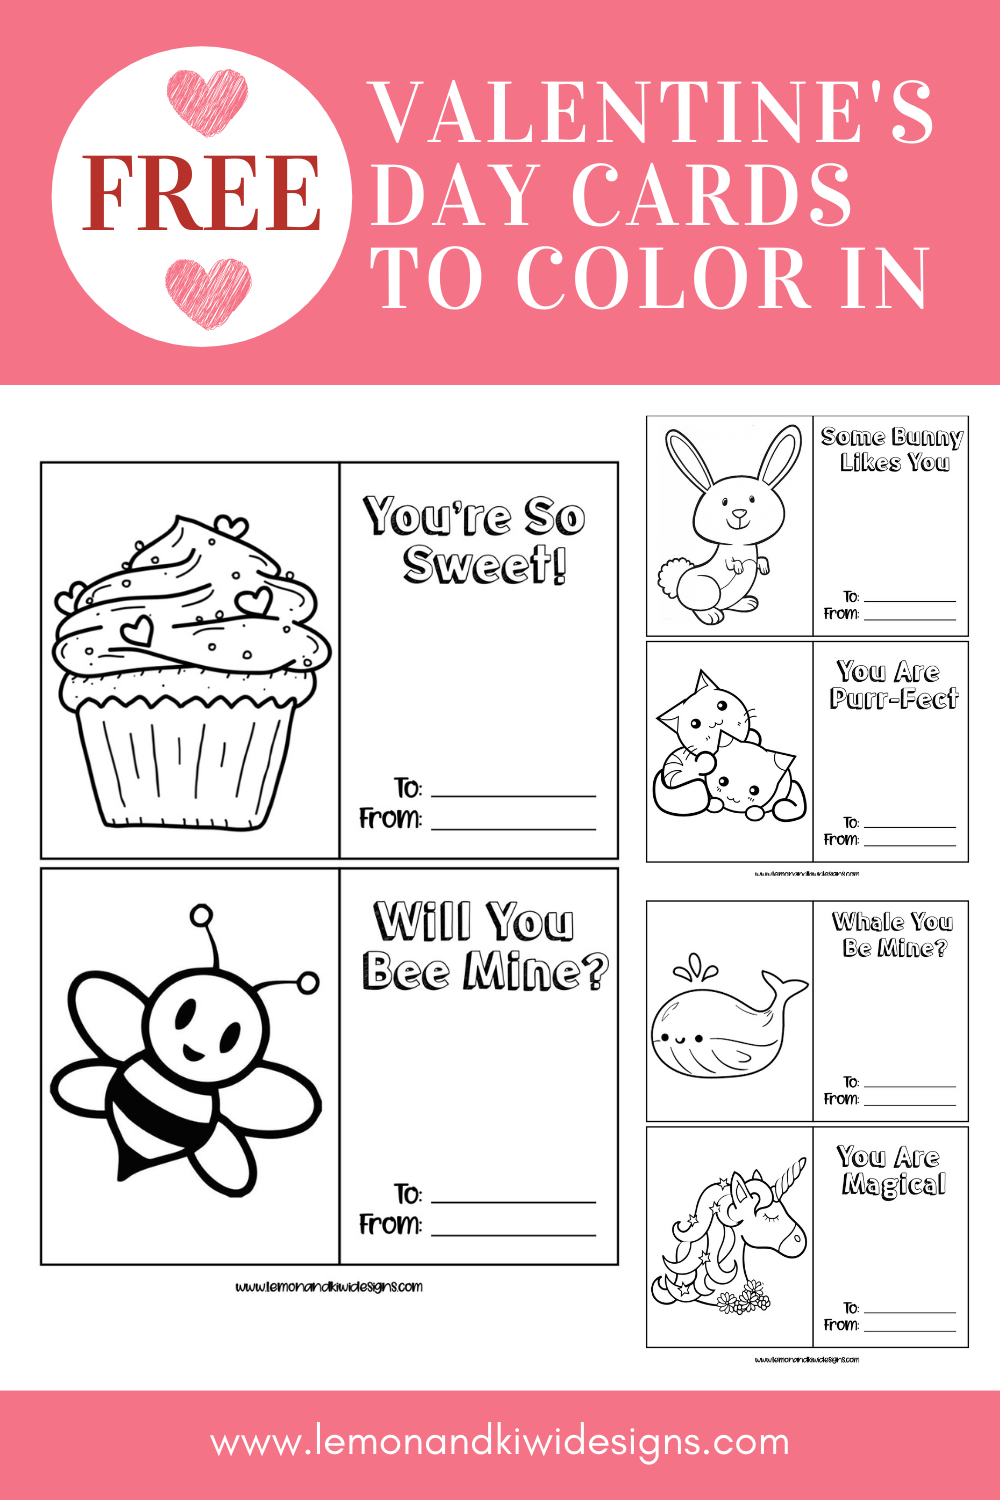 Free Valentine s Day Cards To Color In Printable Valentine s Coloring Pages Lemon And Kiwi Designs - Free Printable Childrens Valentines Day Cards